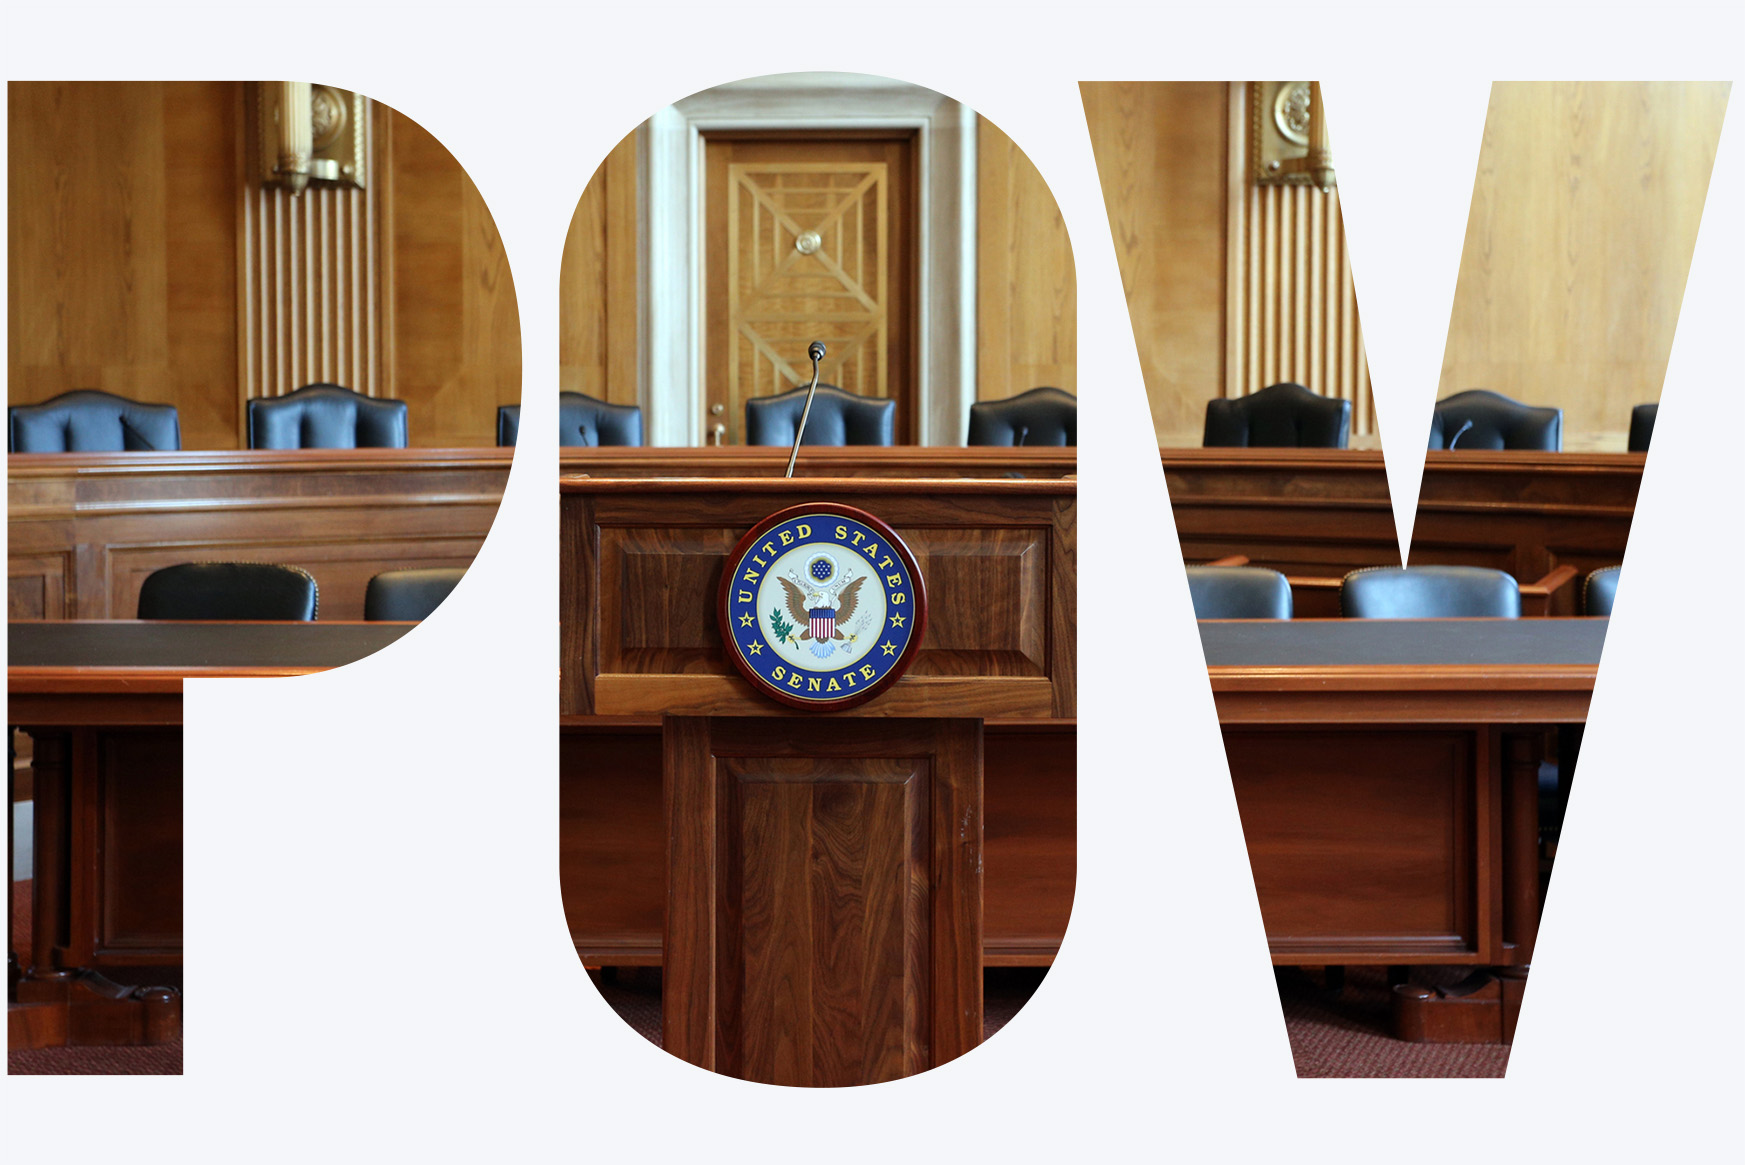 Photo: A picture of a podium with the words "United States Senate" on it. Behind the podium there are tables and chairs. There is an overlay on the photo that says "POV"